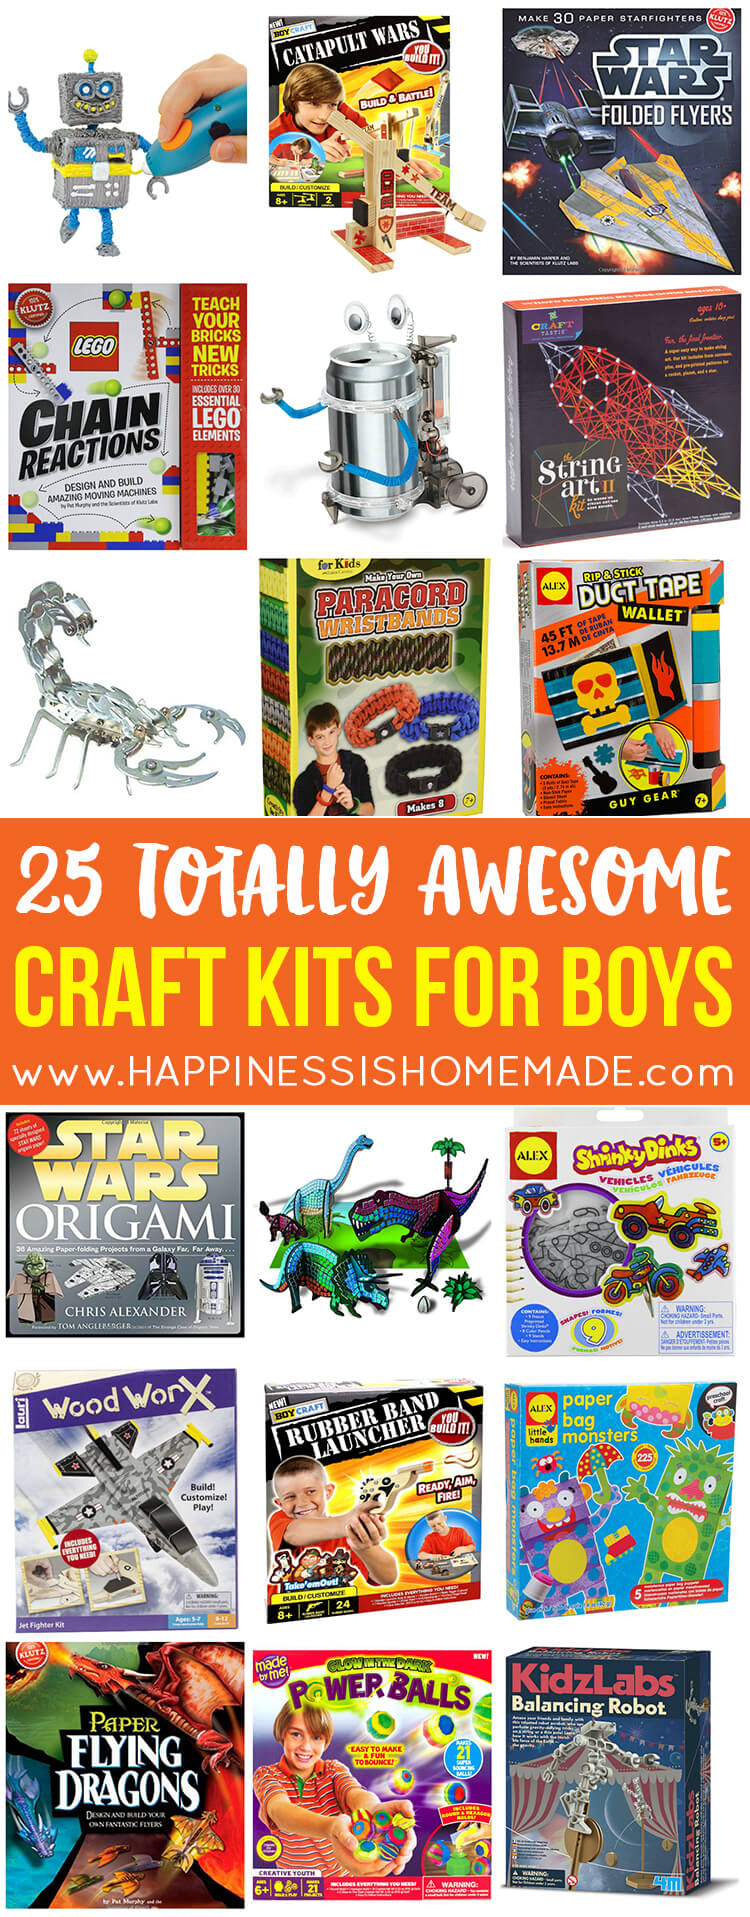 Craft Kits for Boys